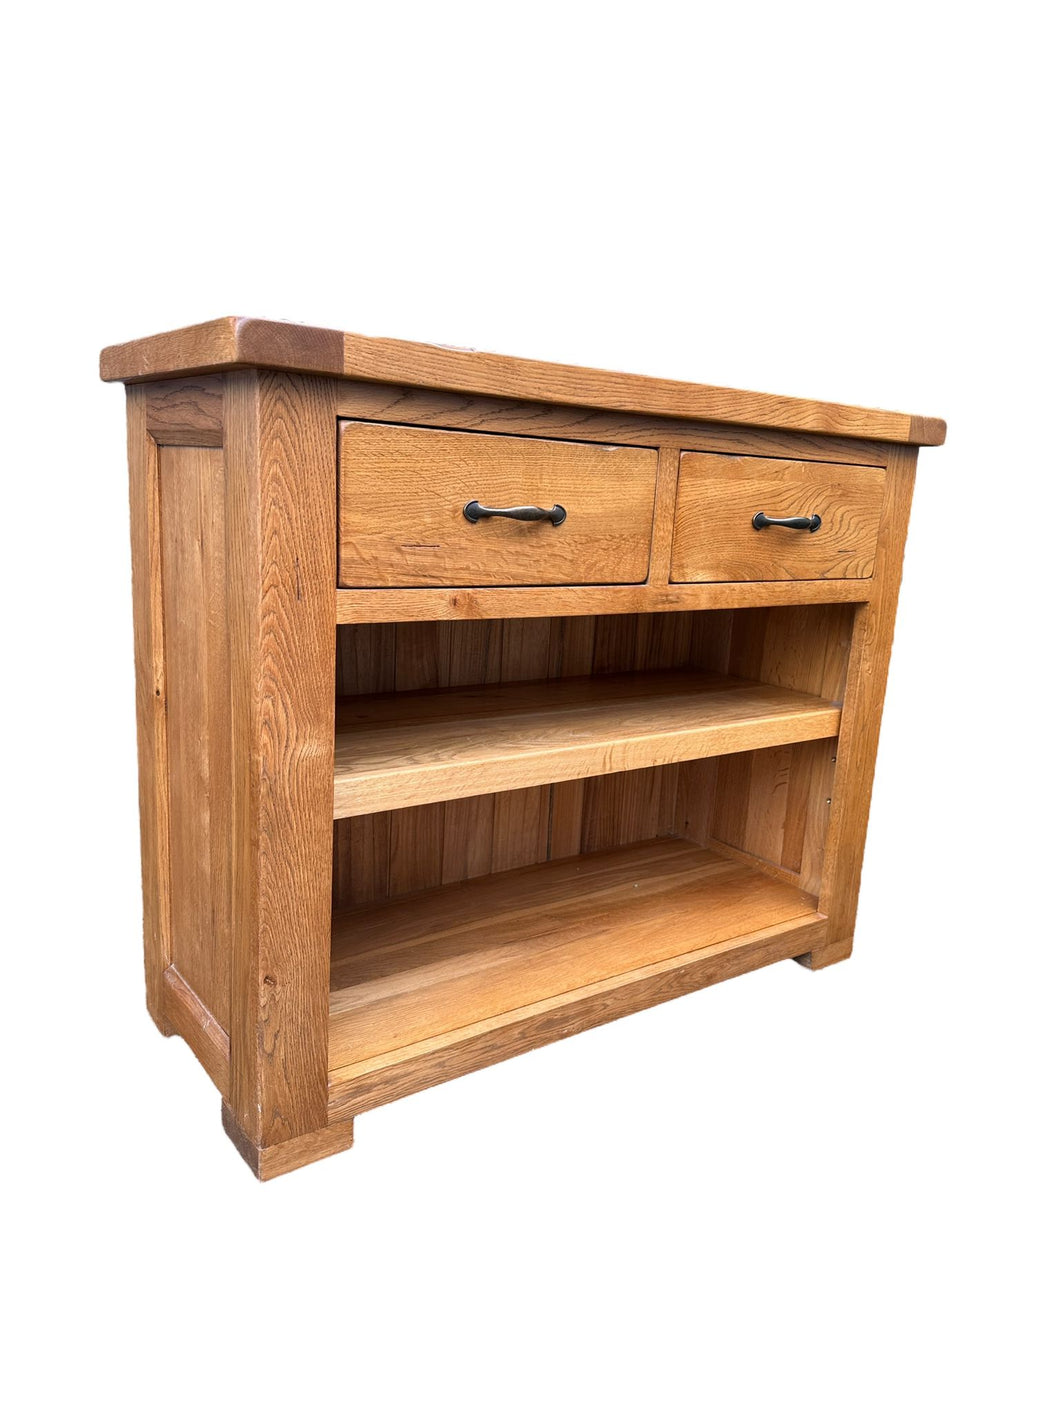 Solid Oak Console Table Sideboard Two Drawers And A Shelf